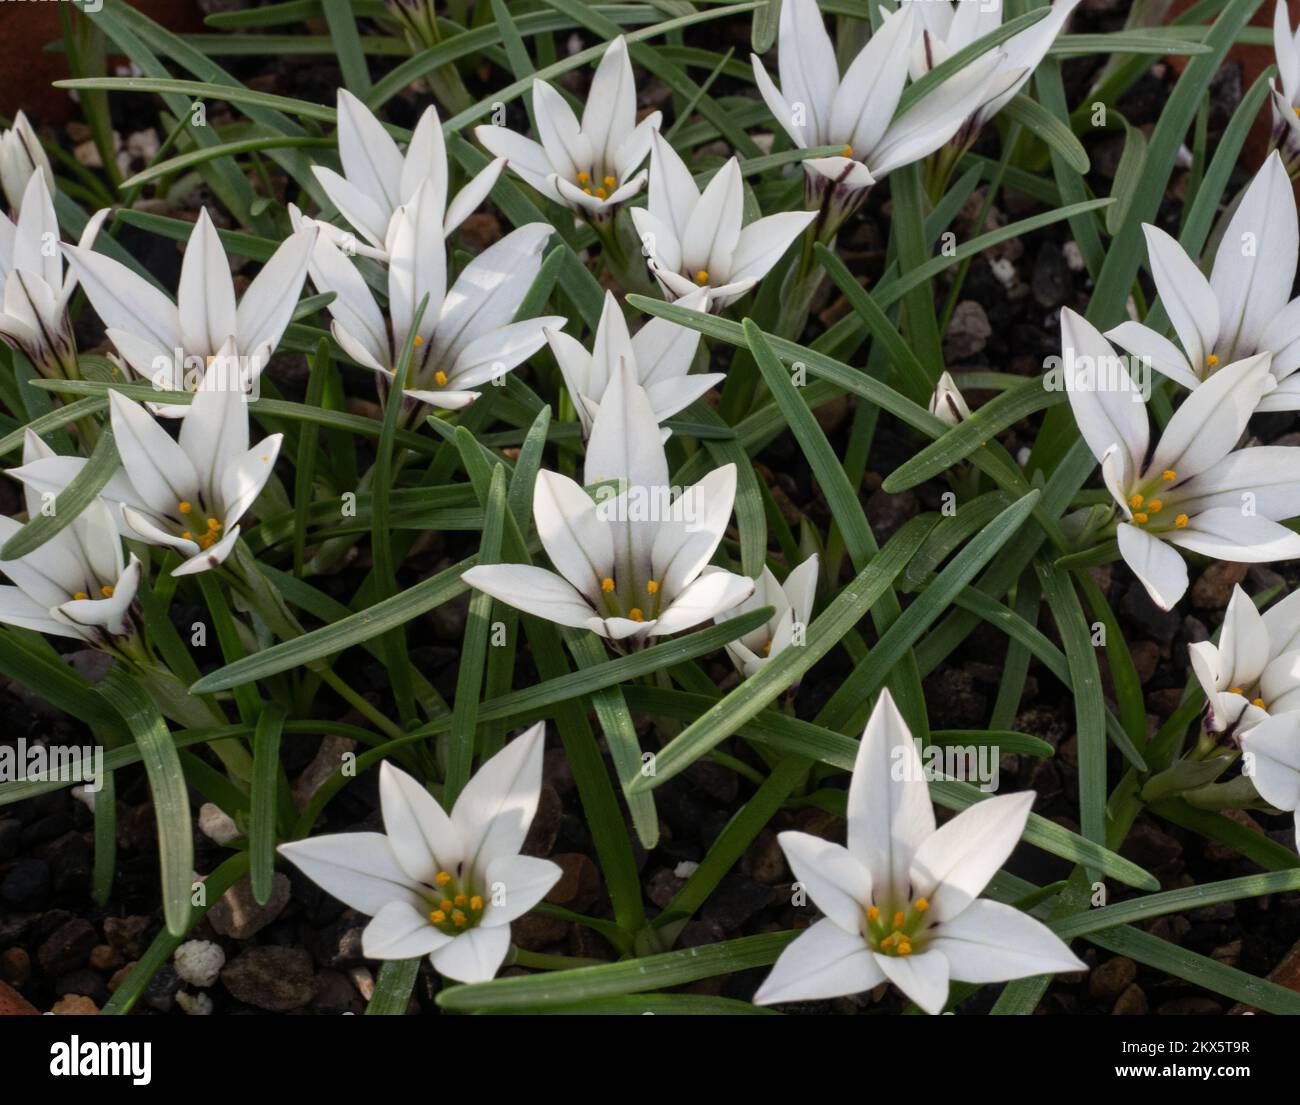 A close up of a group of white starry flowers of Ipheion sessile Stock Photo